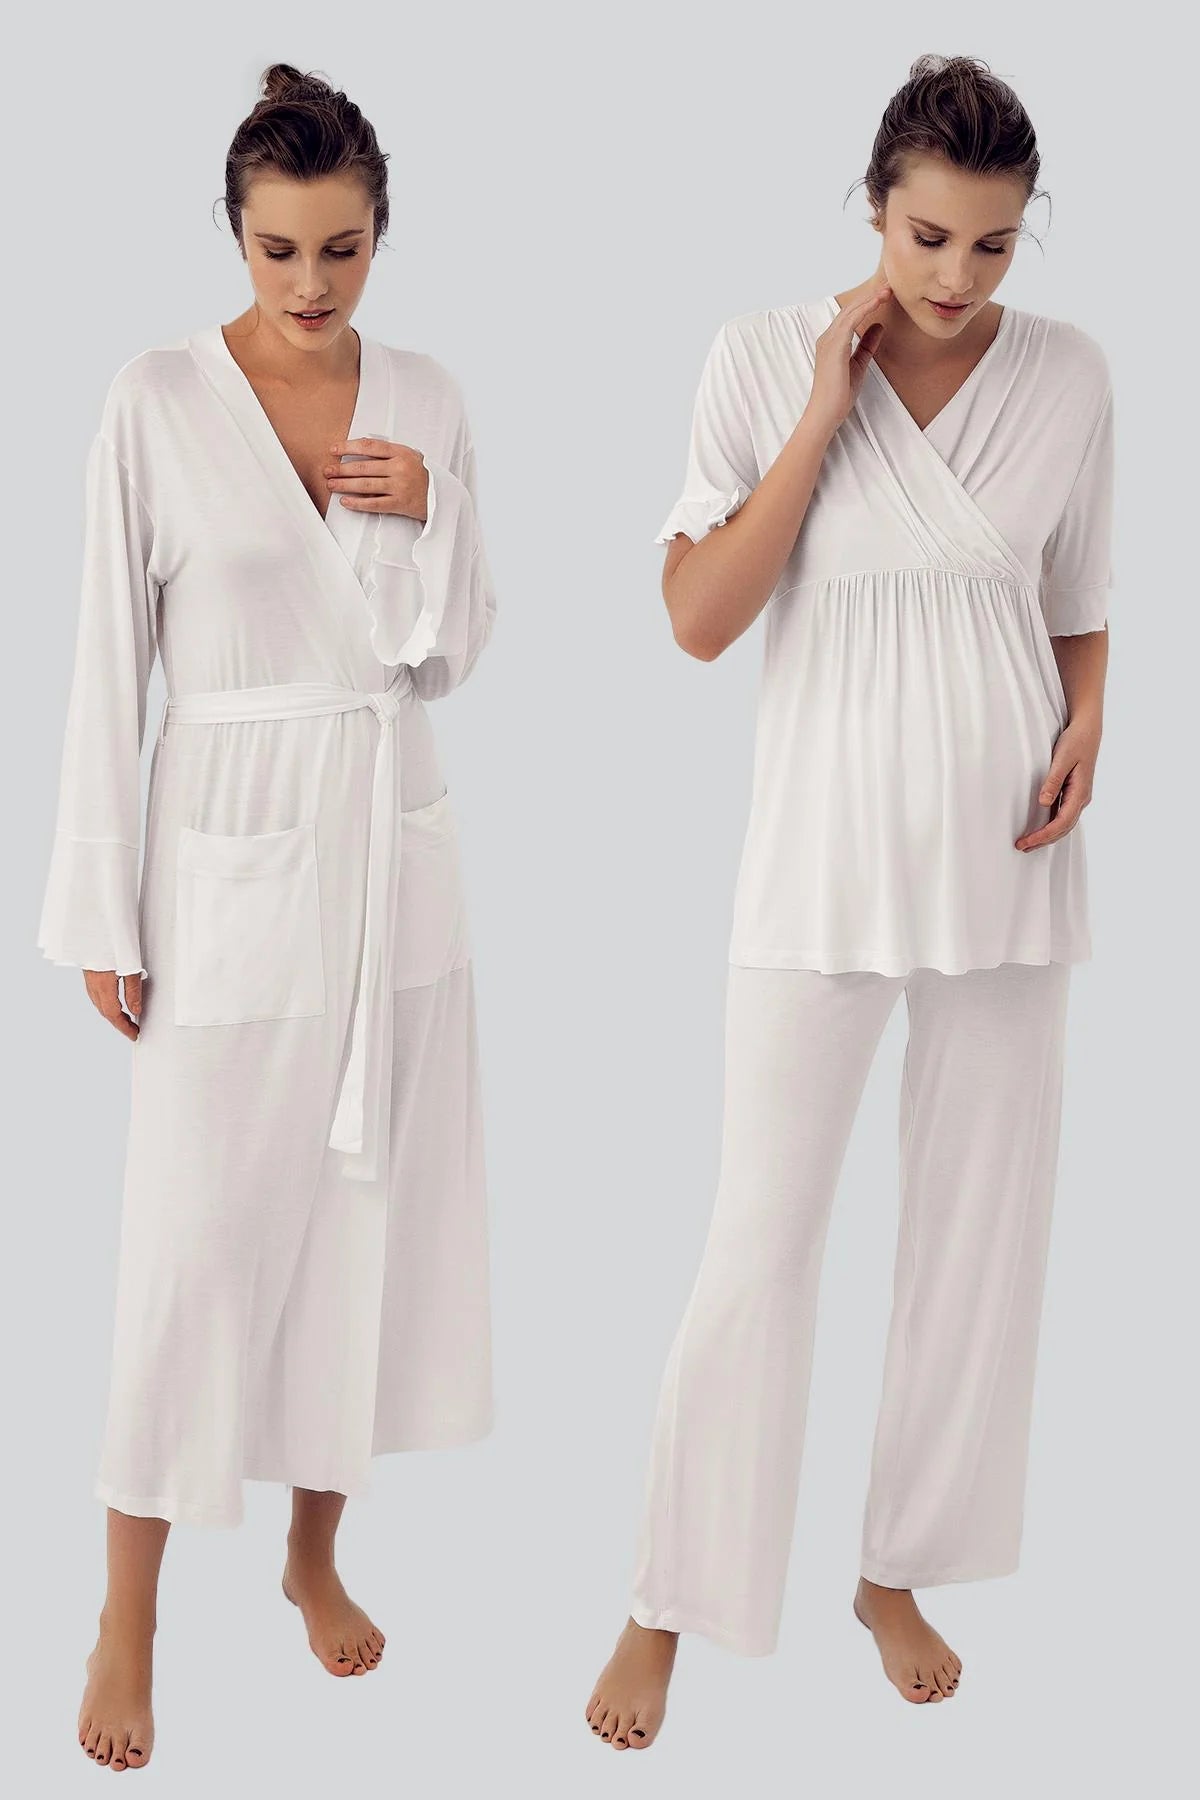 Shopymommy 16309 Double Breasted 3-Pieces Maternity & Nursing Pajamas With Flywheel Arm Robe Ecru